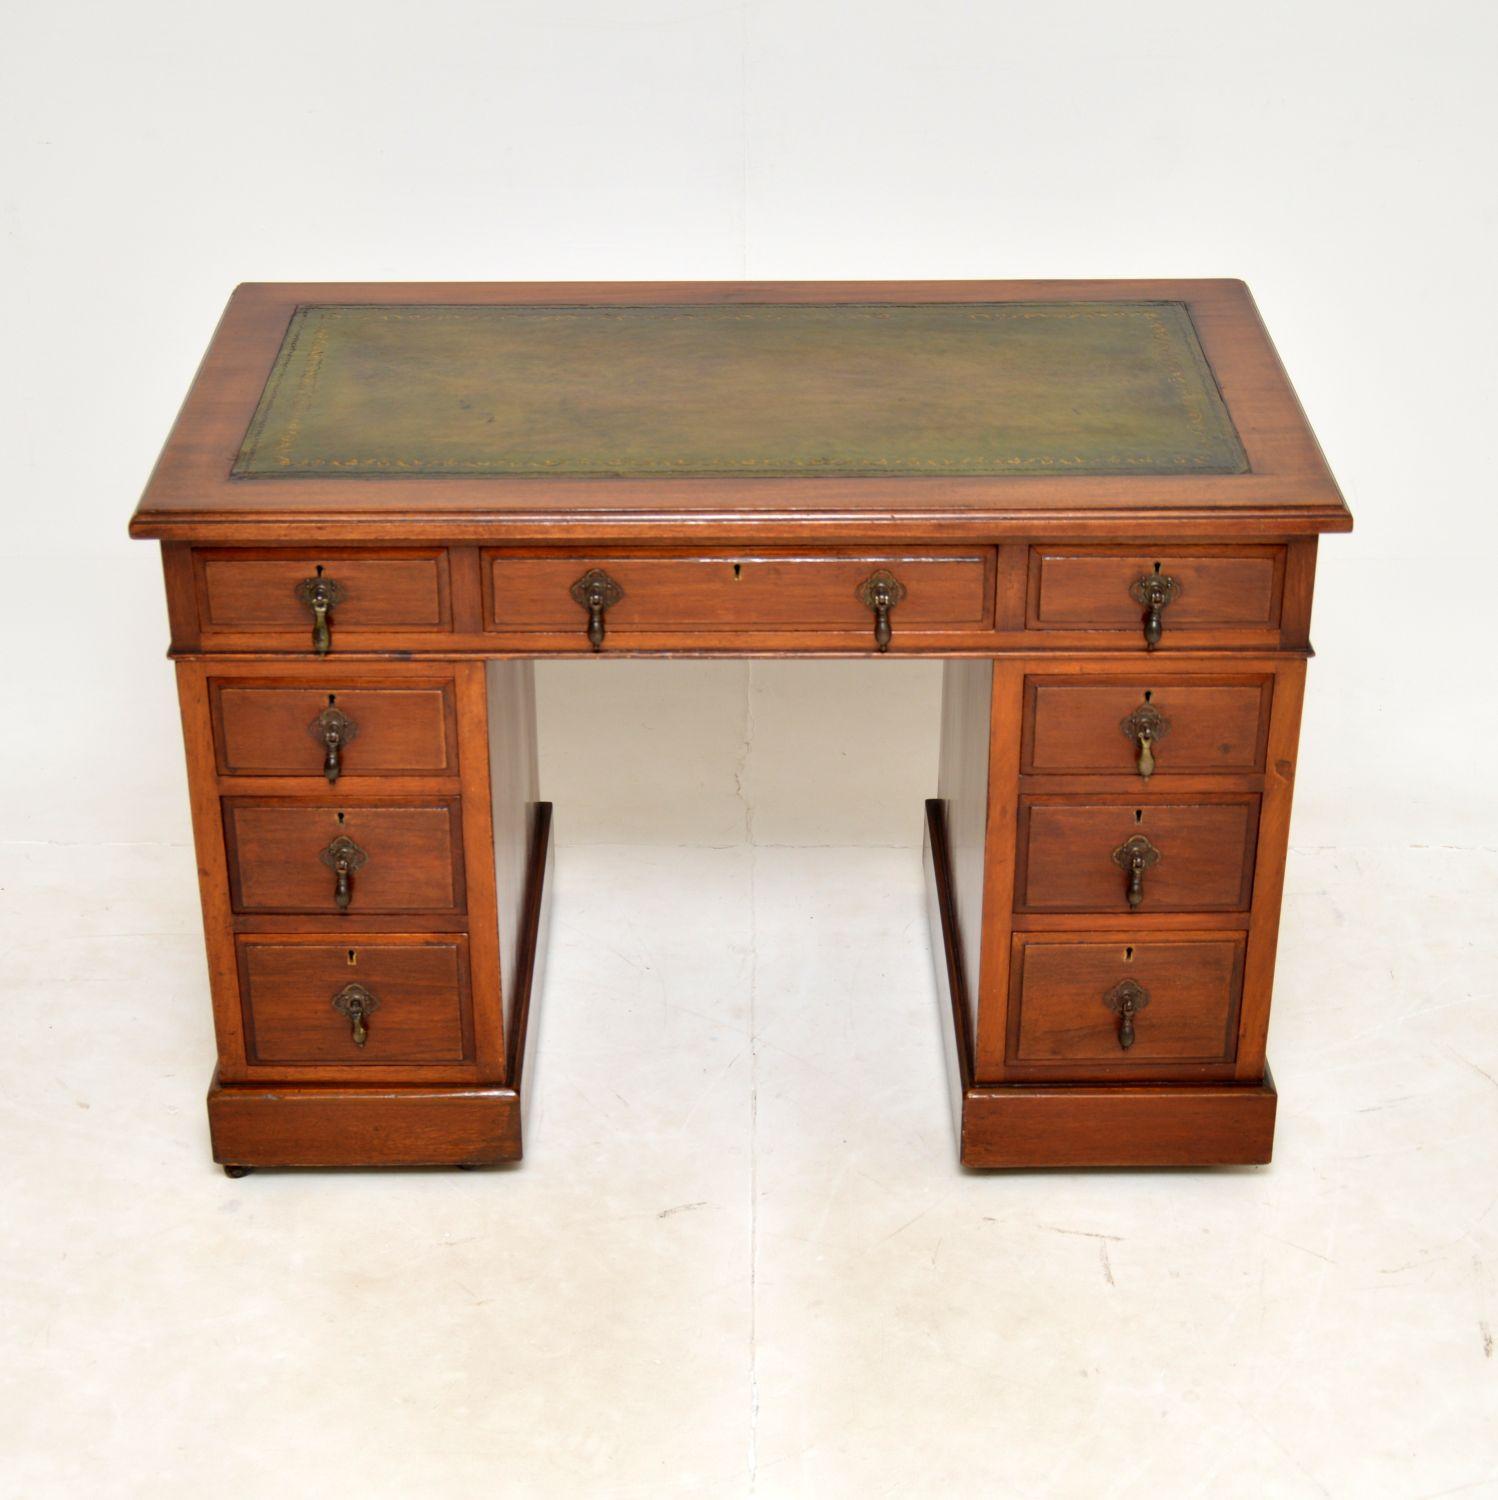 A smart and very well made antique Victorian pedestal desk. This was made in England, it dates from around the 1870-1890 period.

It is of lovely quality and is a very useful, petite size. The drawer fronts have brass tear drop handles, this sits on